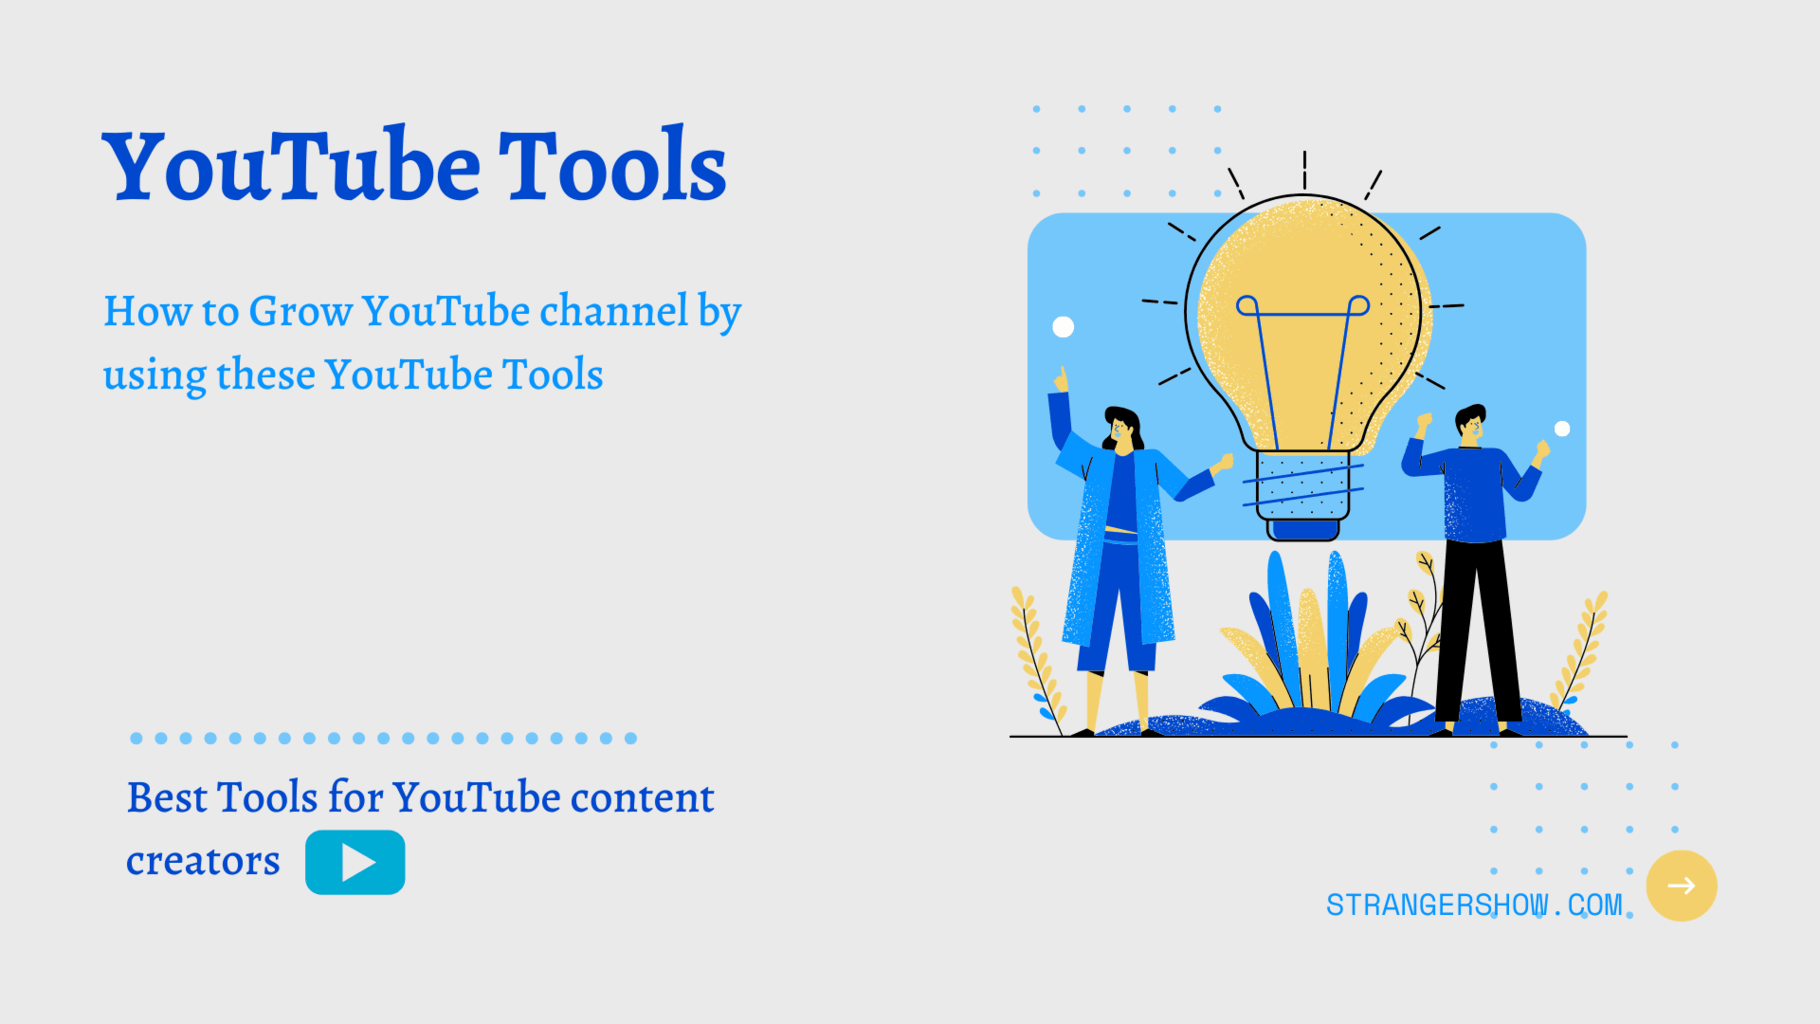 YouTube Tools, A complete and best lists for video content creators